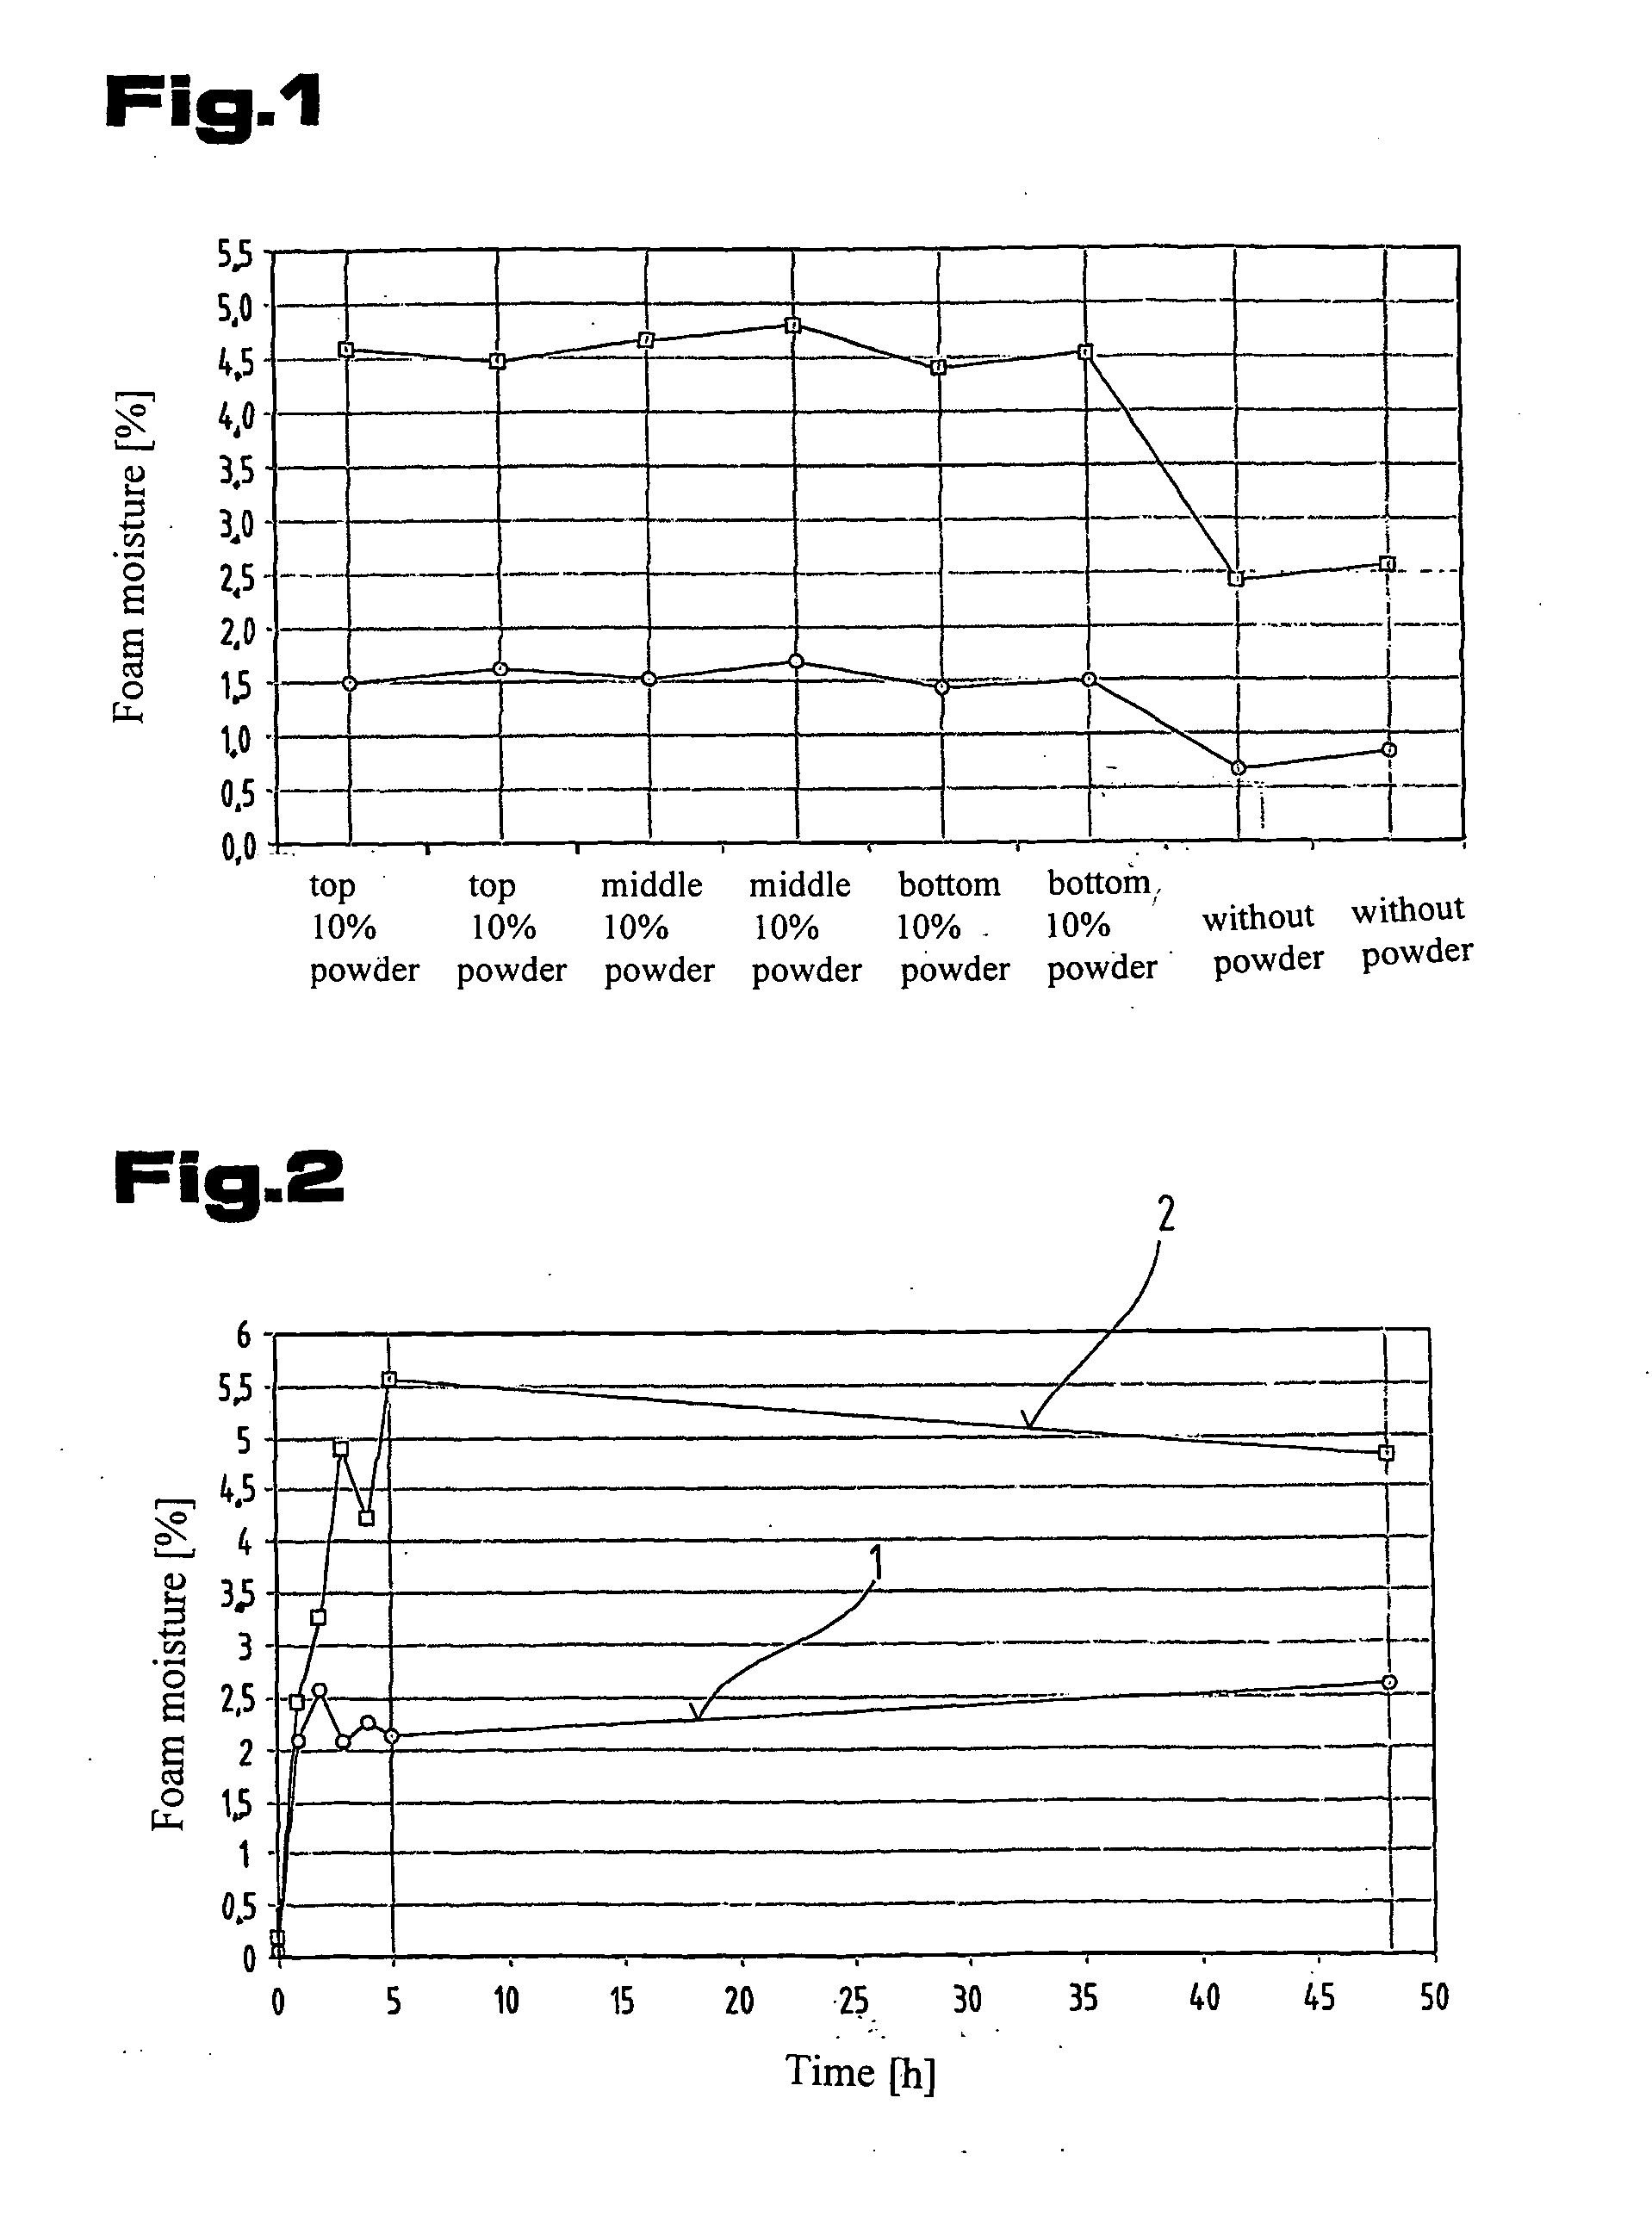 Foam element with hydrophilic substances incorporated in it